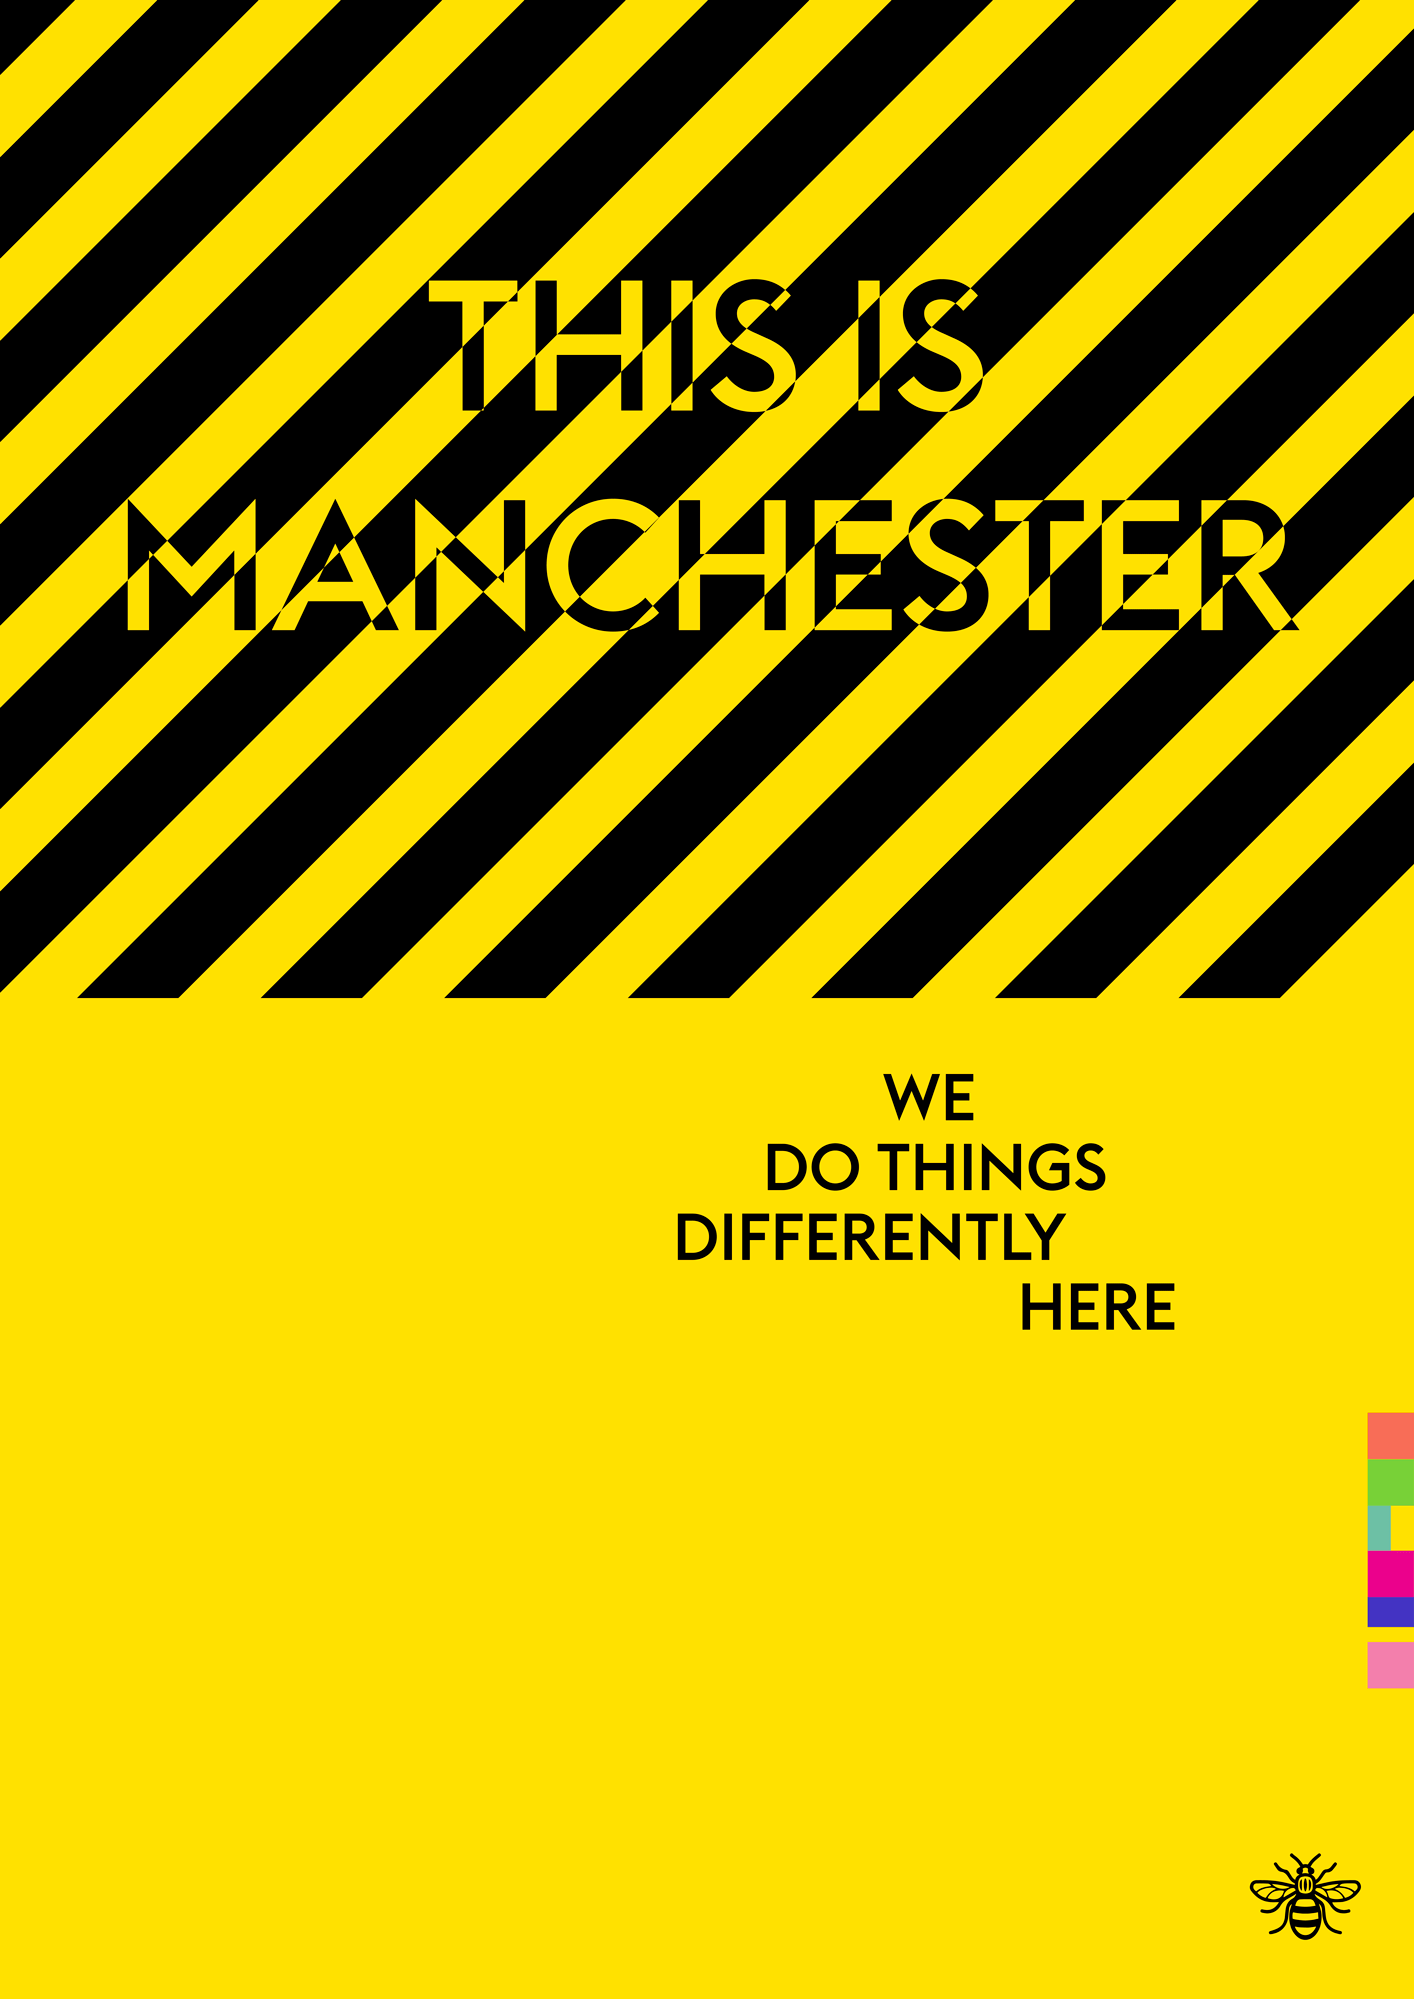 This is Manchester